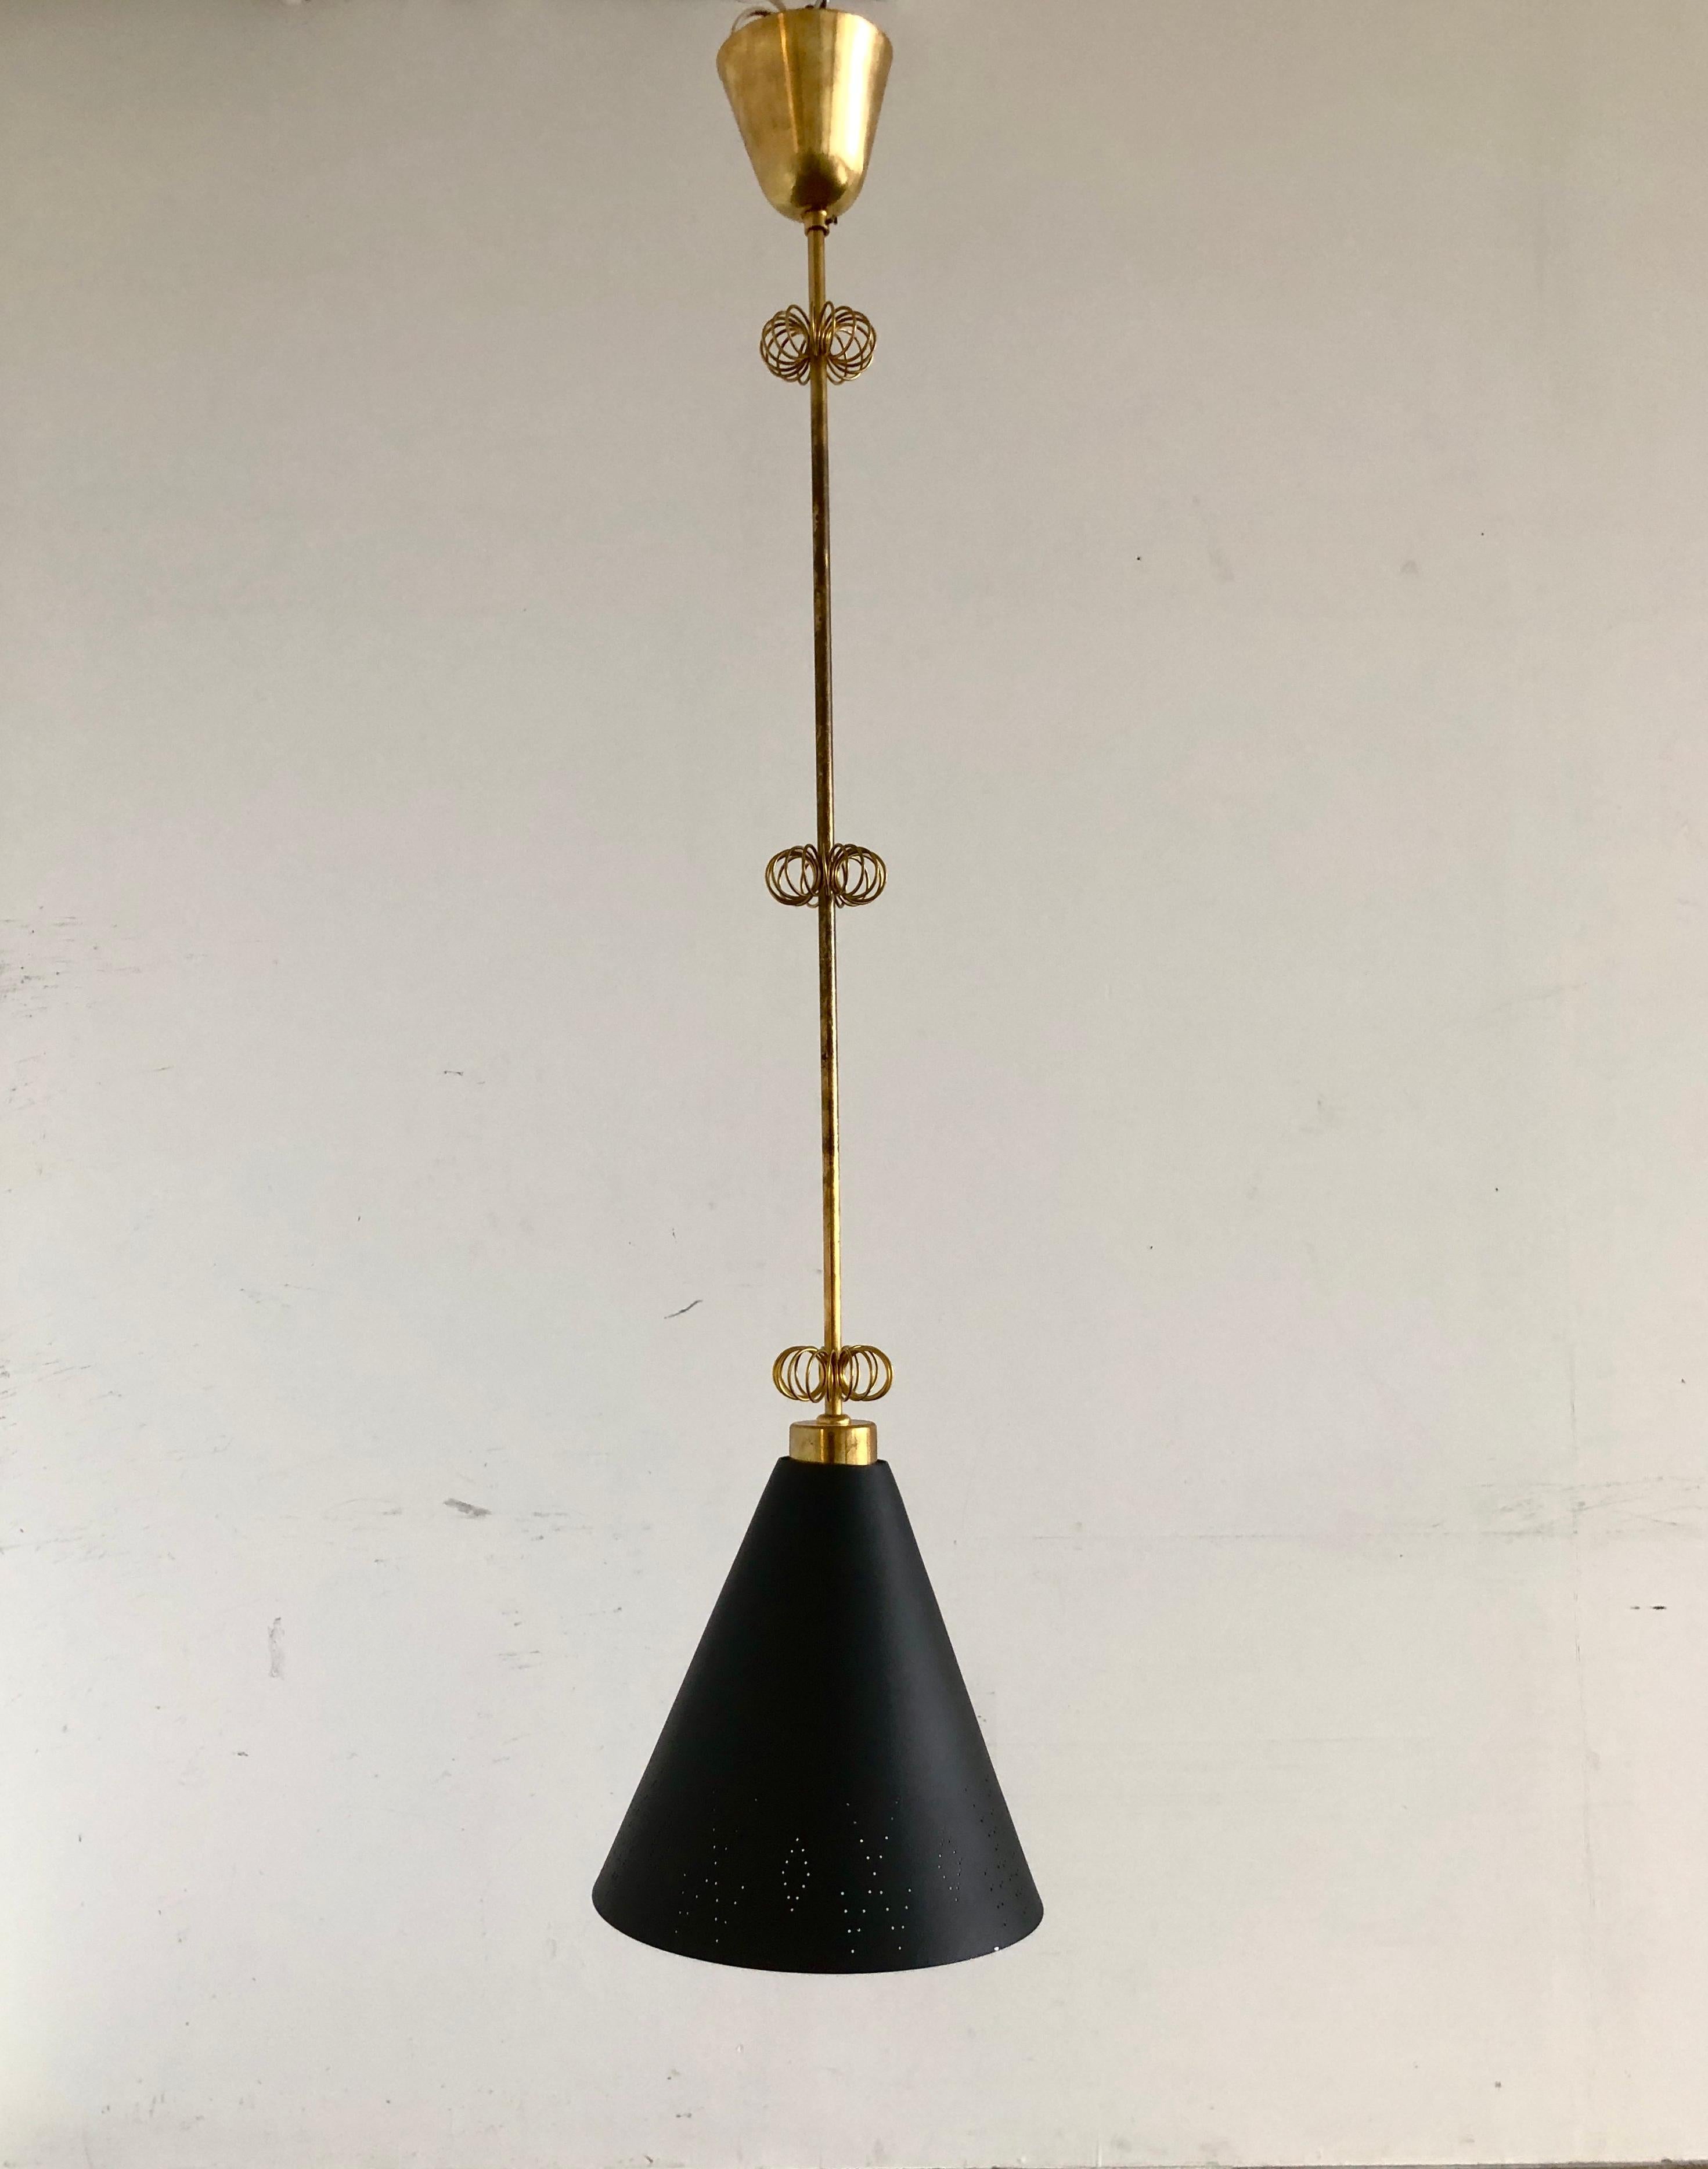 A Pendant designed by Paavo Tynell, produced by Idman Oy, Finland, circa 1950.
Perforated metal shade, polished brass stem with brass wire decorations.
Diameter 10? ; Drop 42?.
Two fixtures available. Rewiring available upon request.